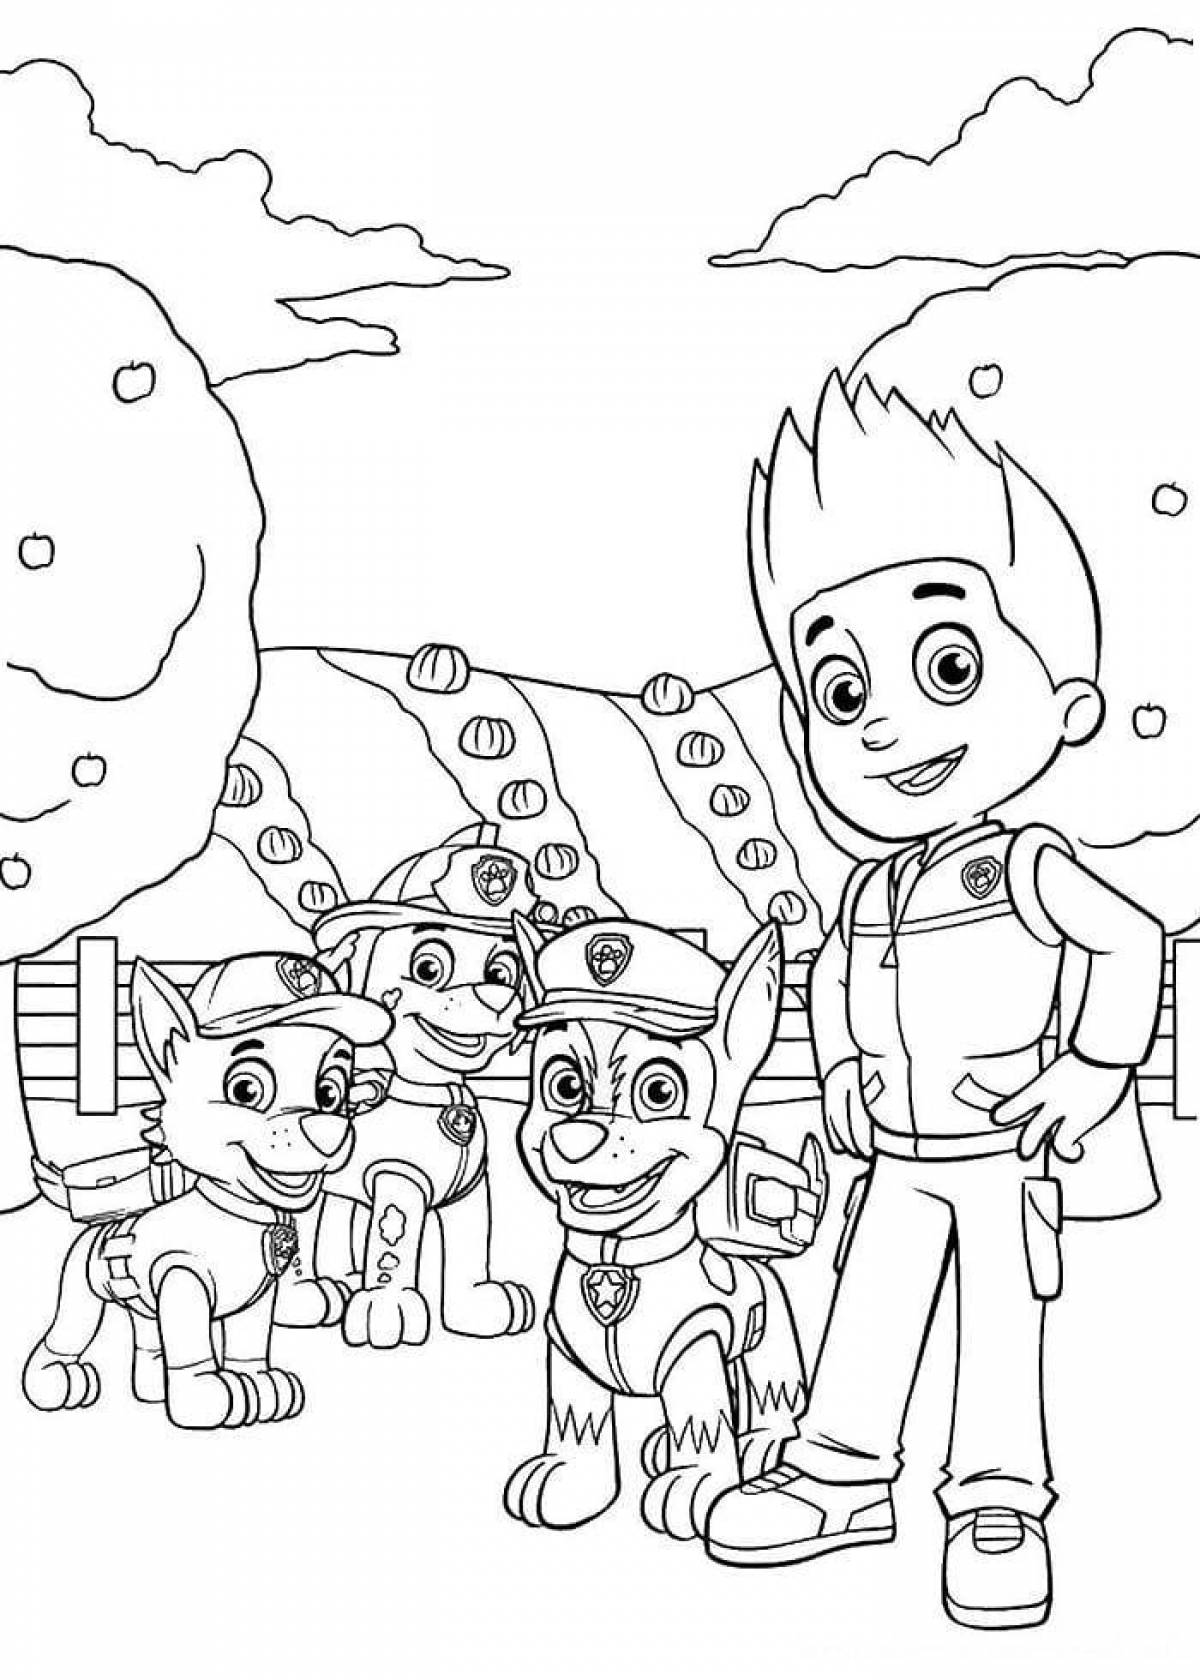 Courageous rider coloring page